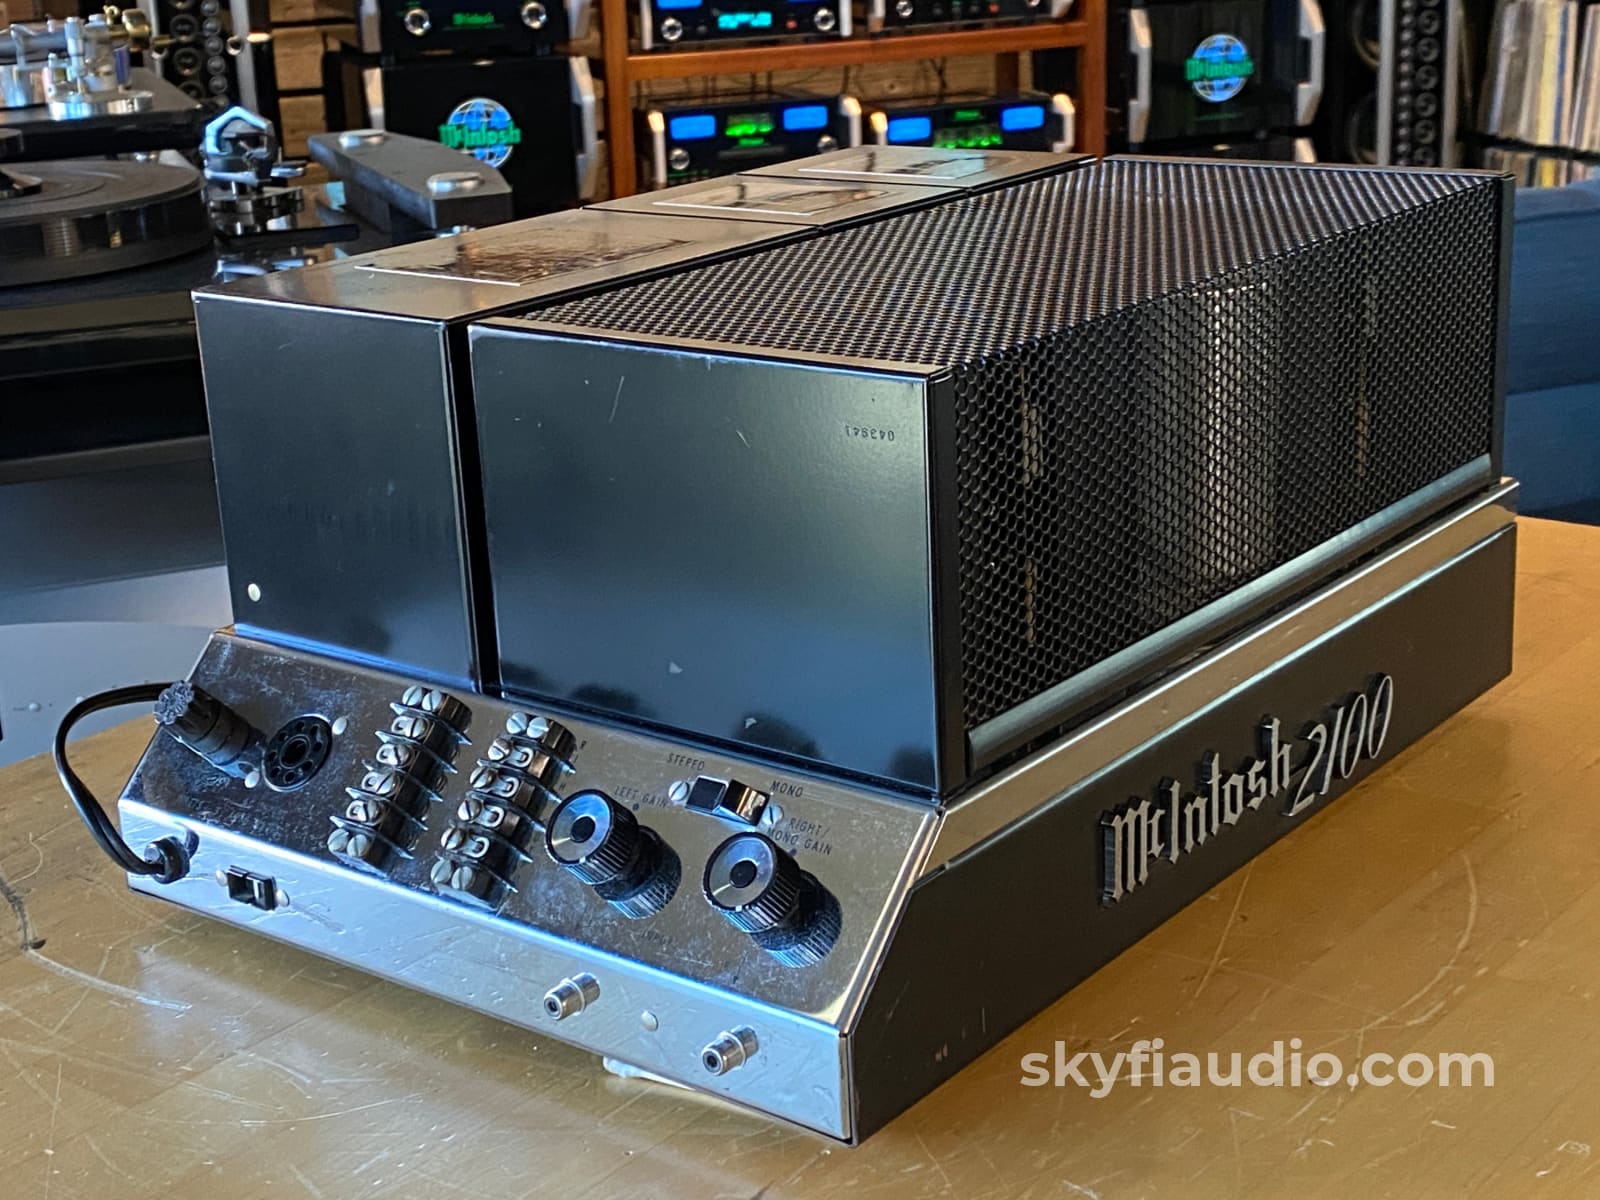 Mcintosh Mc2100 Vintage Amplifier From Abkco Music & Records - The Rolling Stones And More!